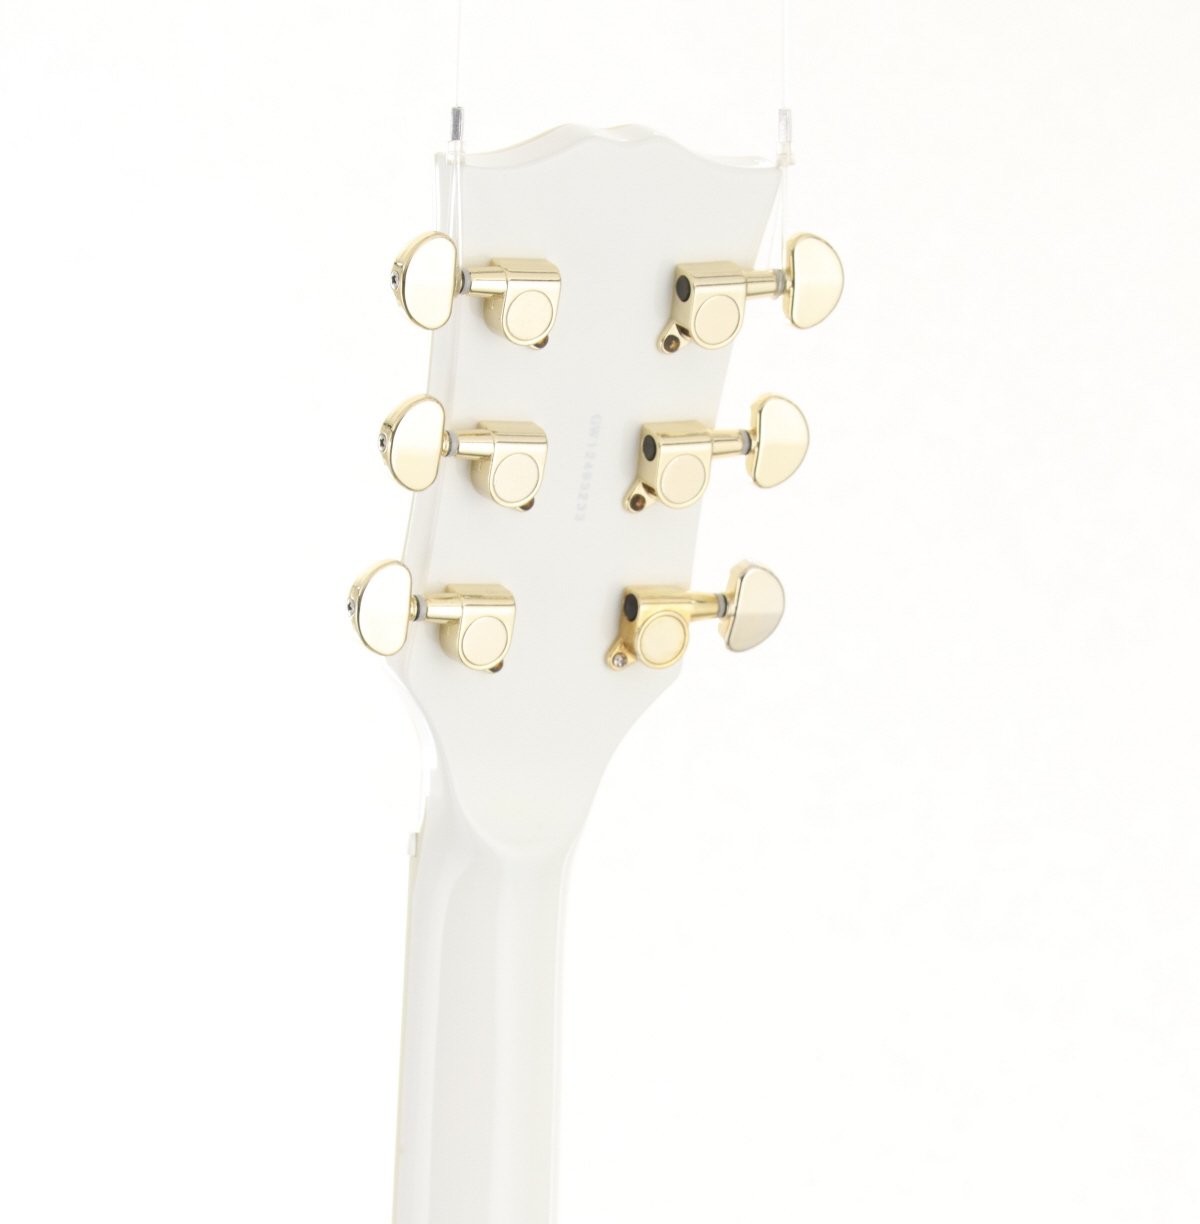 USED GRASSROOTS / G-LP-CTM White [10]